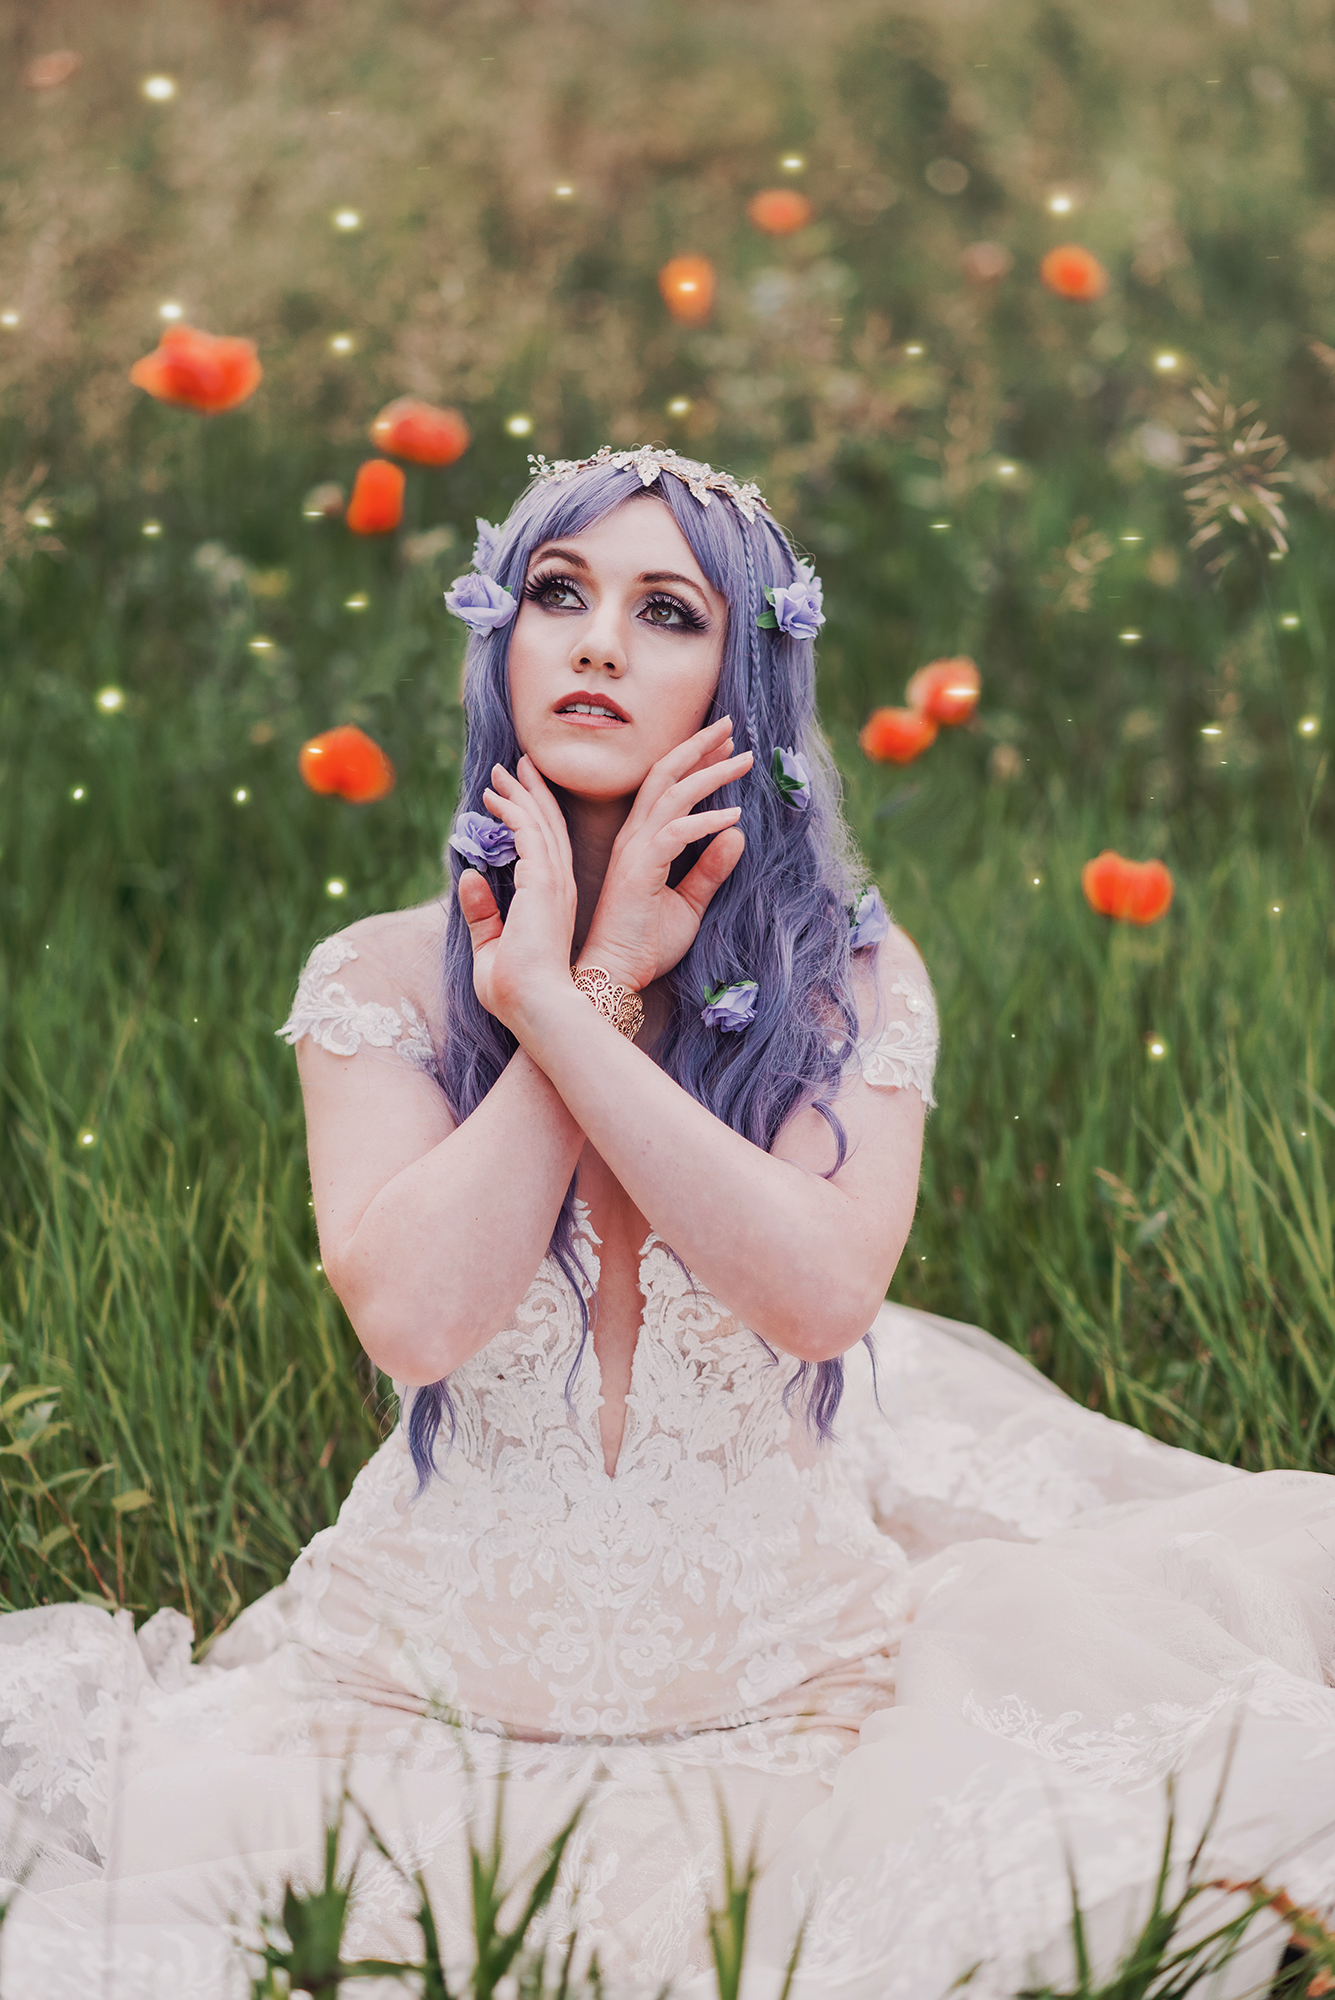 A woman with purple hair and wearing a white dress poses for a fantasy photo taken by Kendra Colleen Photography in a field of wildflowers in Boulder Colorado.